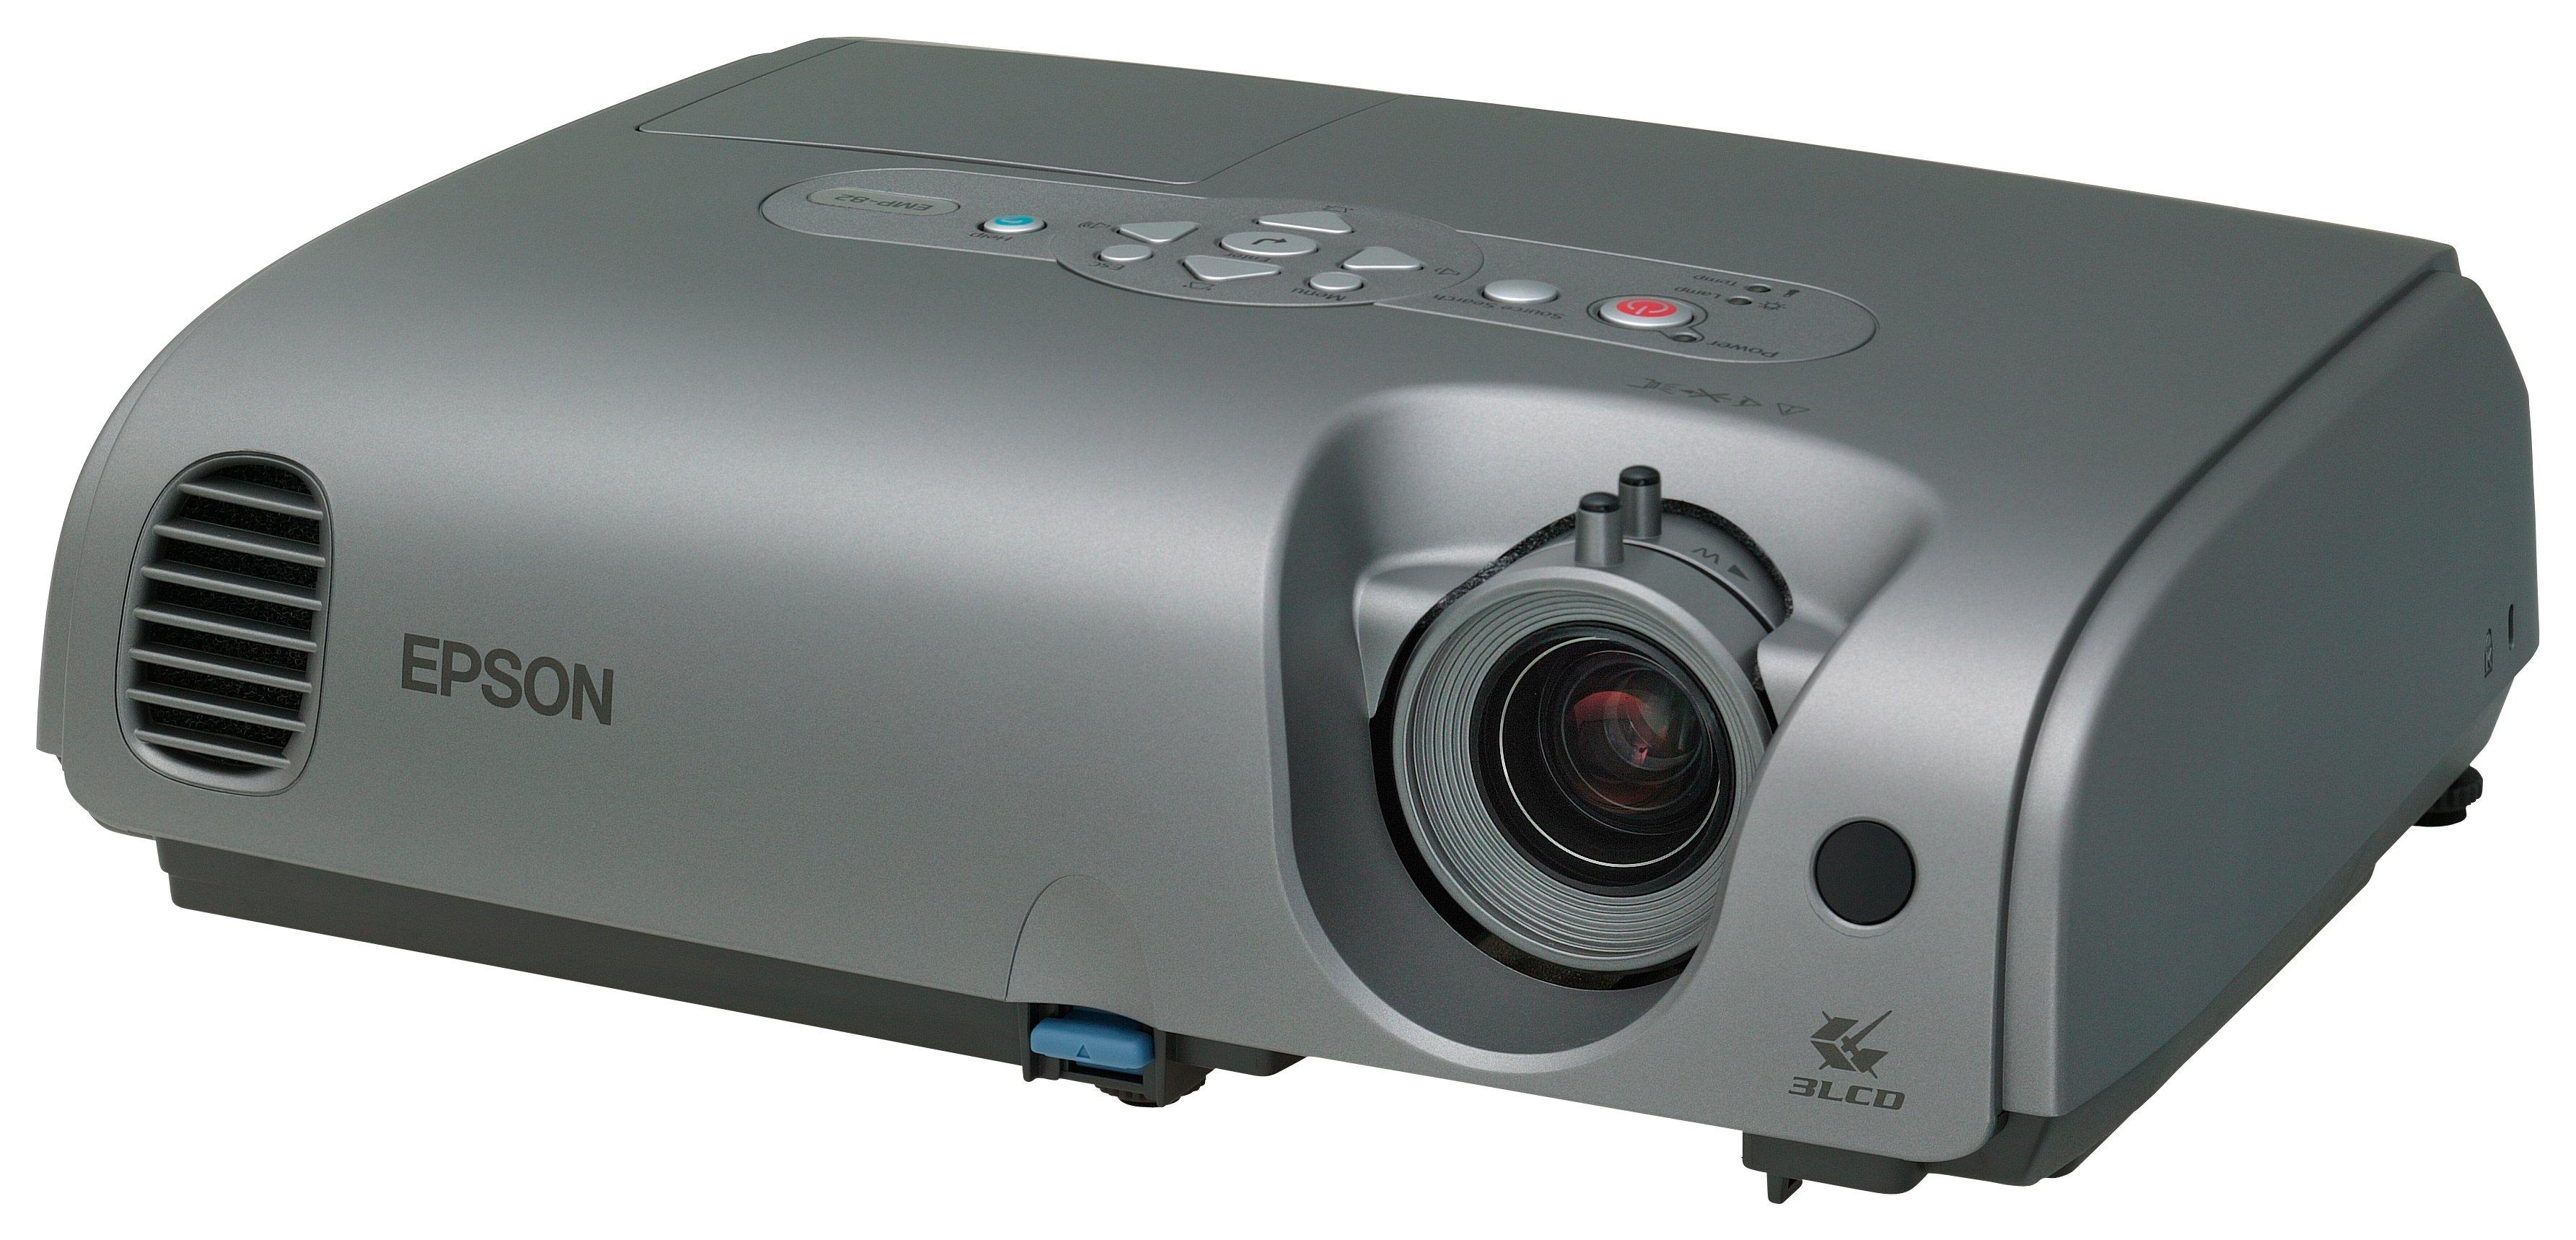 Epson EMP-82 | Projectors | Products | Epson Europe